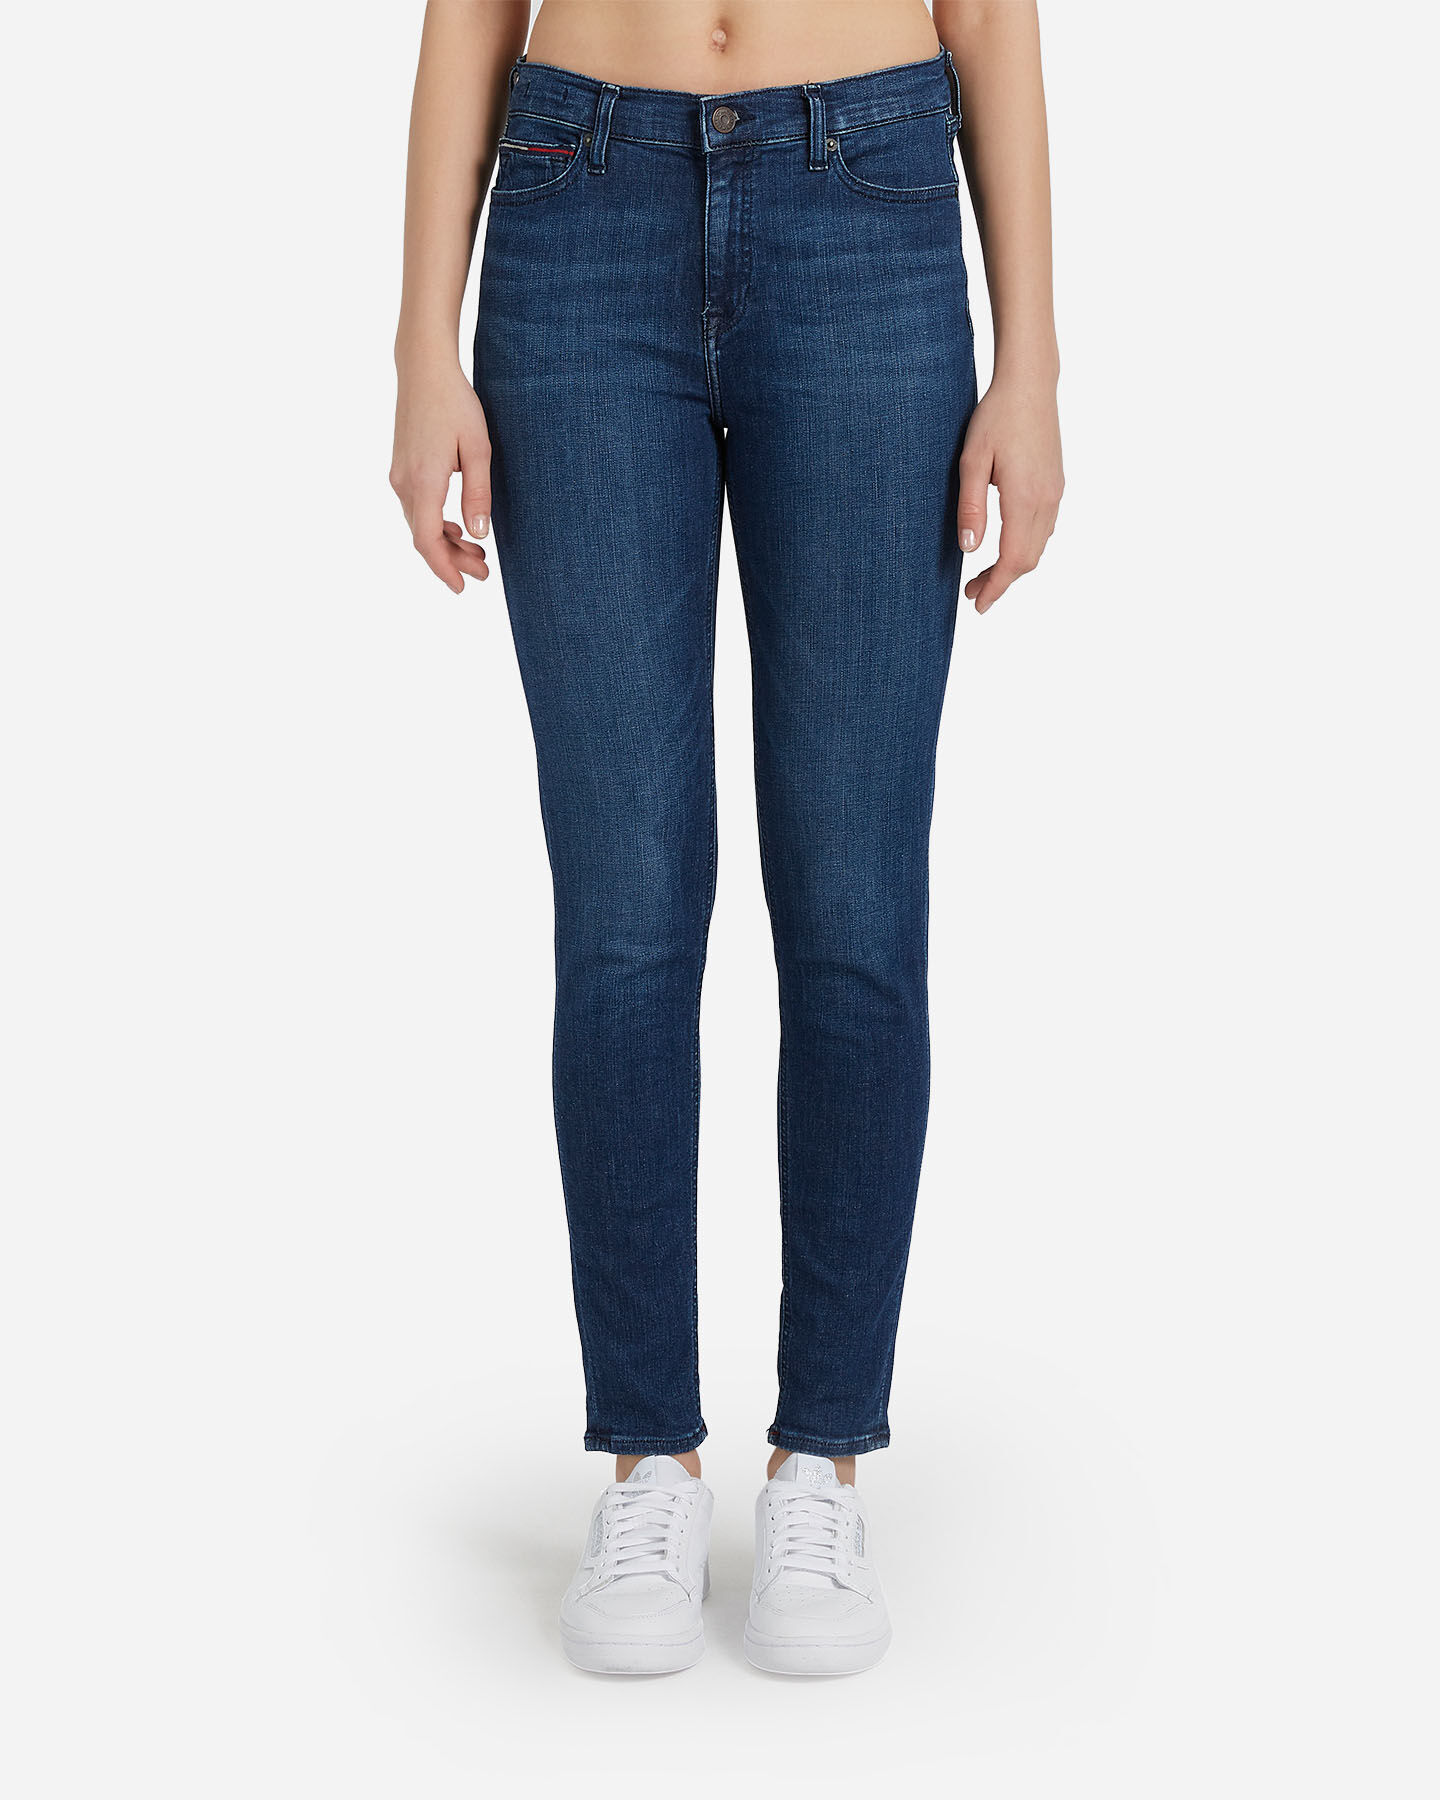  Jeans TOMMY HILFIGER NORA MID RISE SKINNY W S4073584|1BK|27 scatto 0